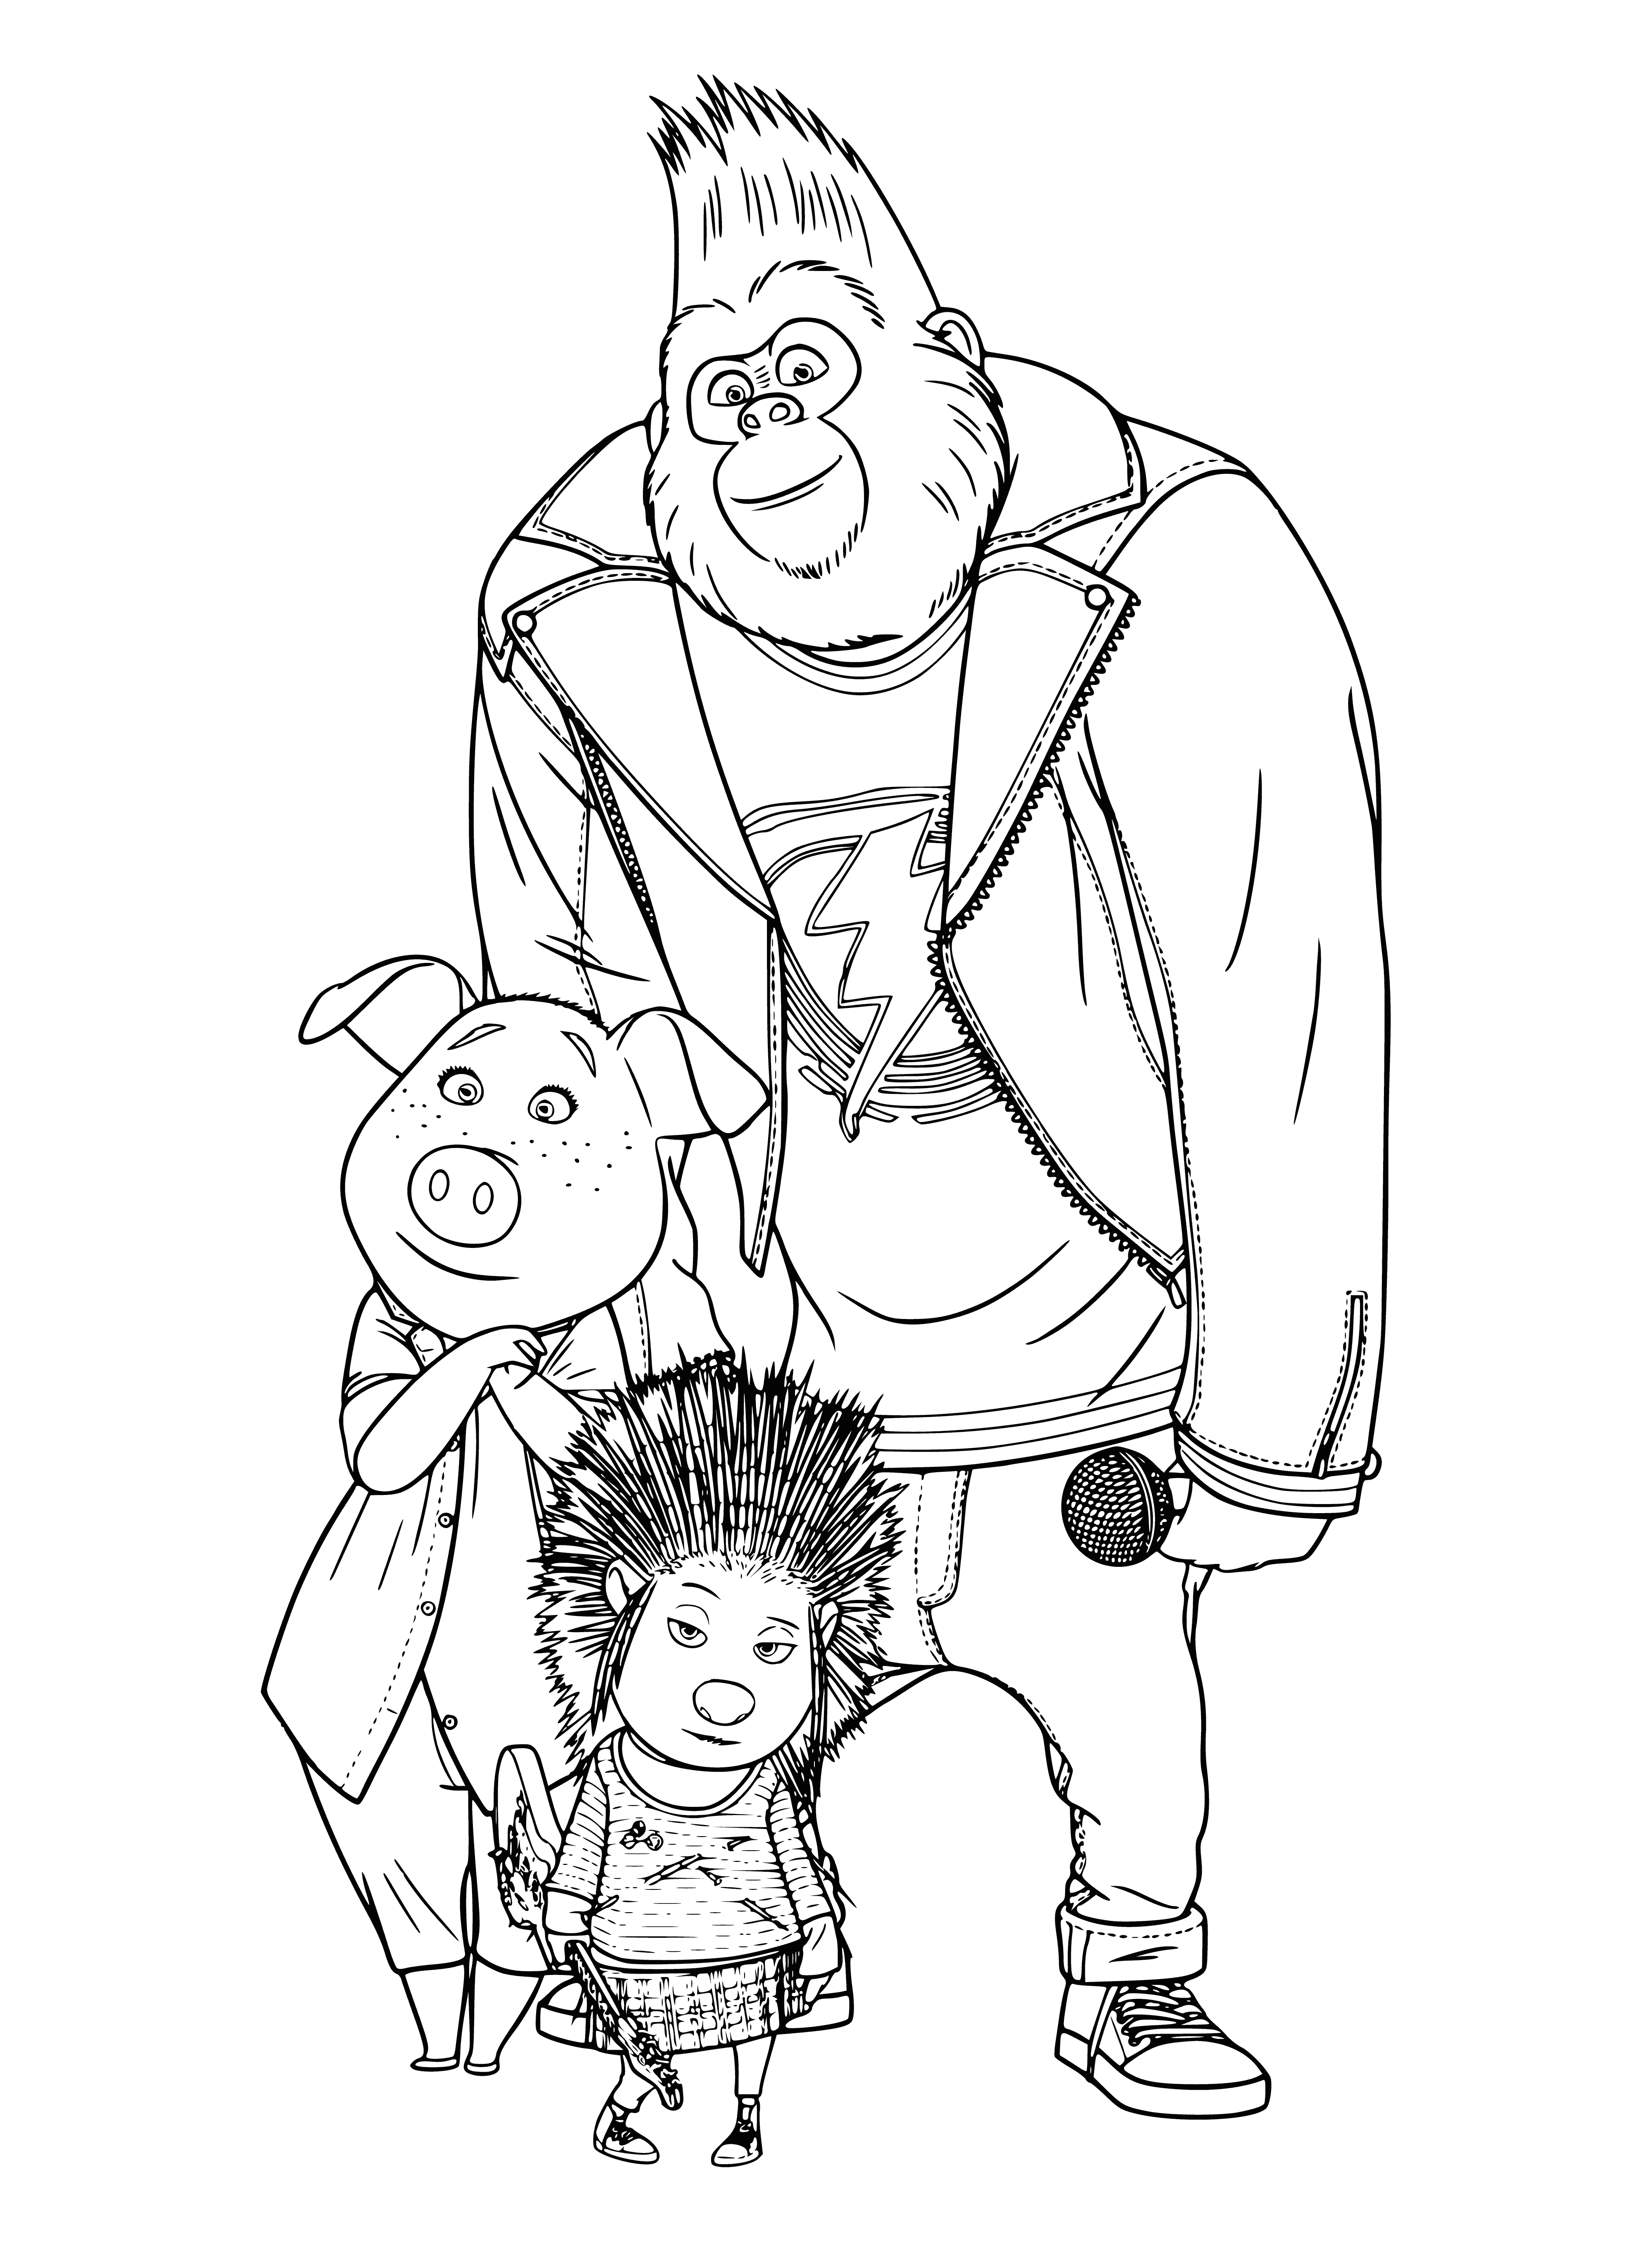 Rosita, Ash and Johnny coloring page